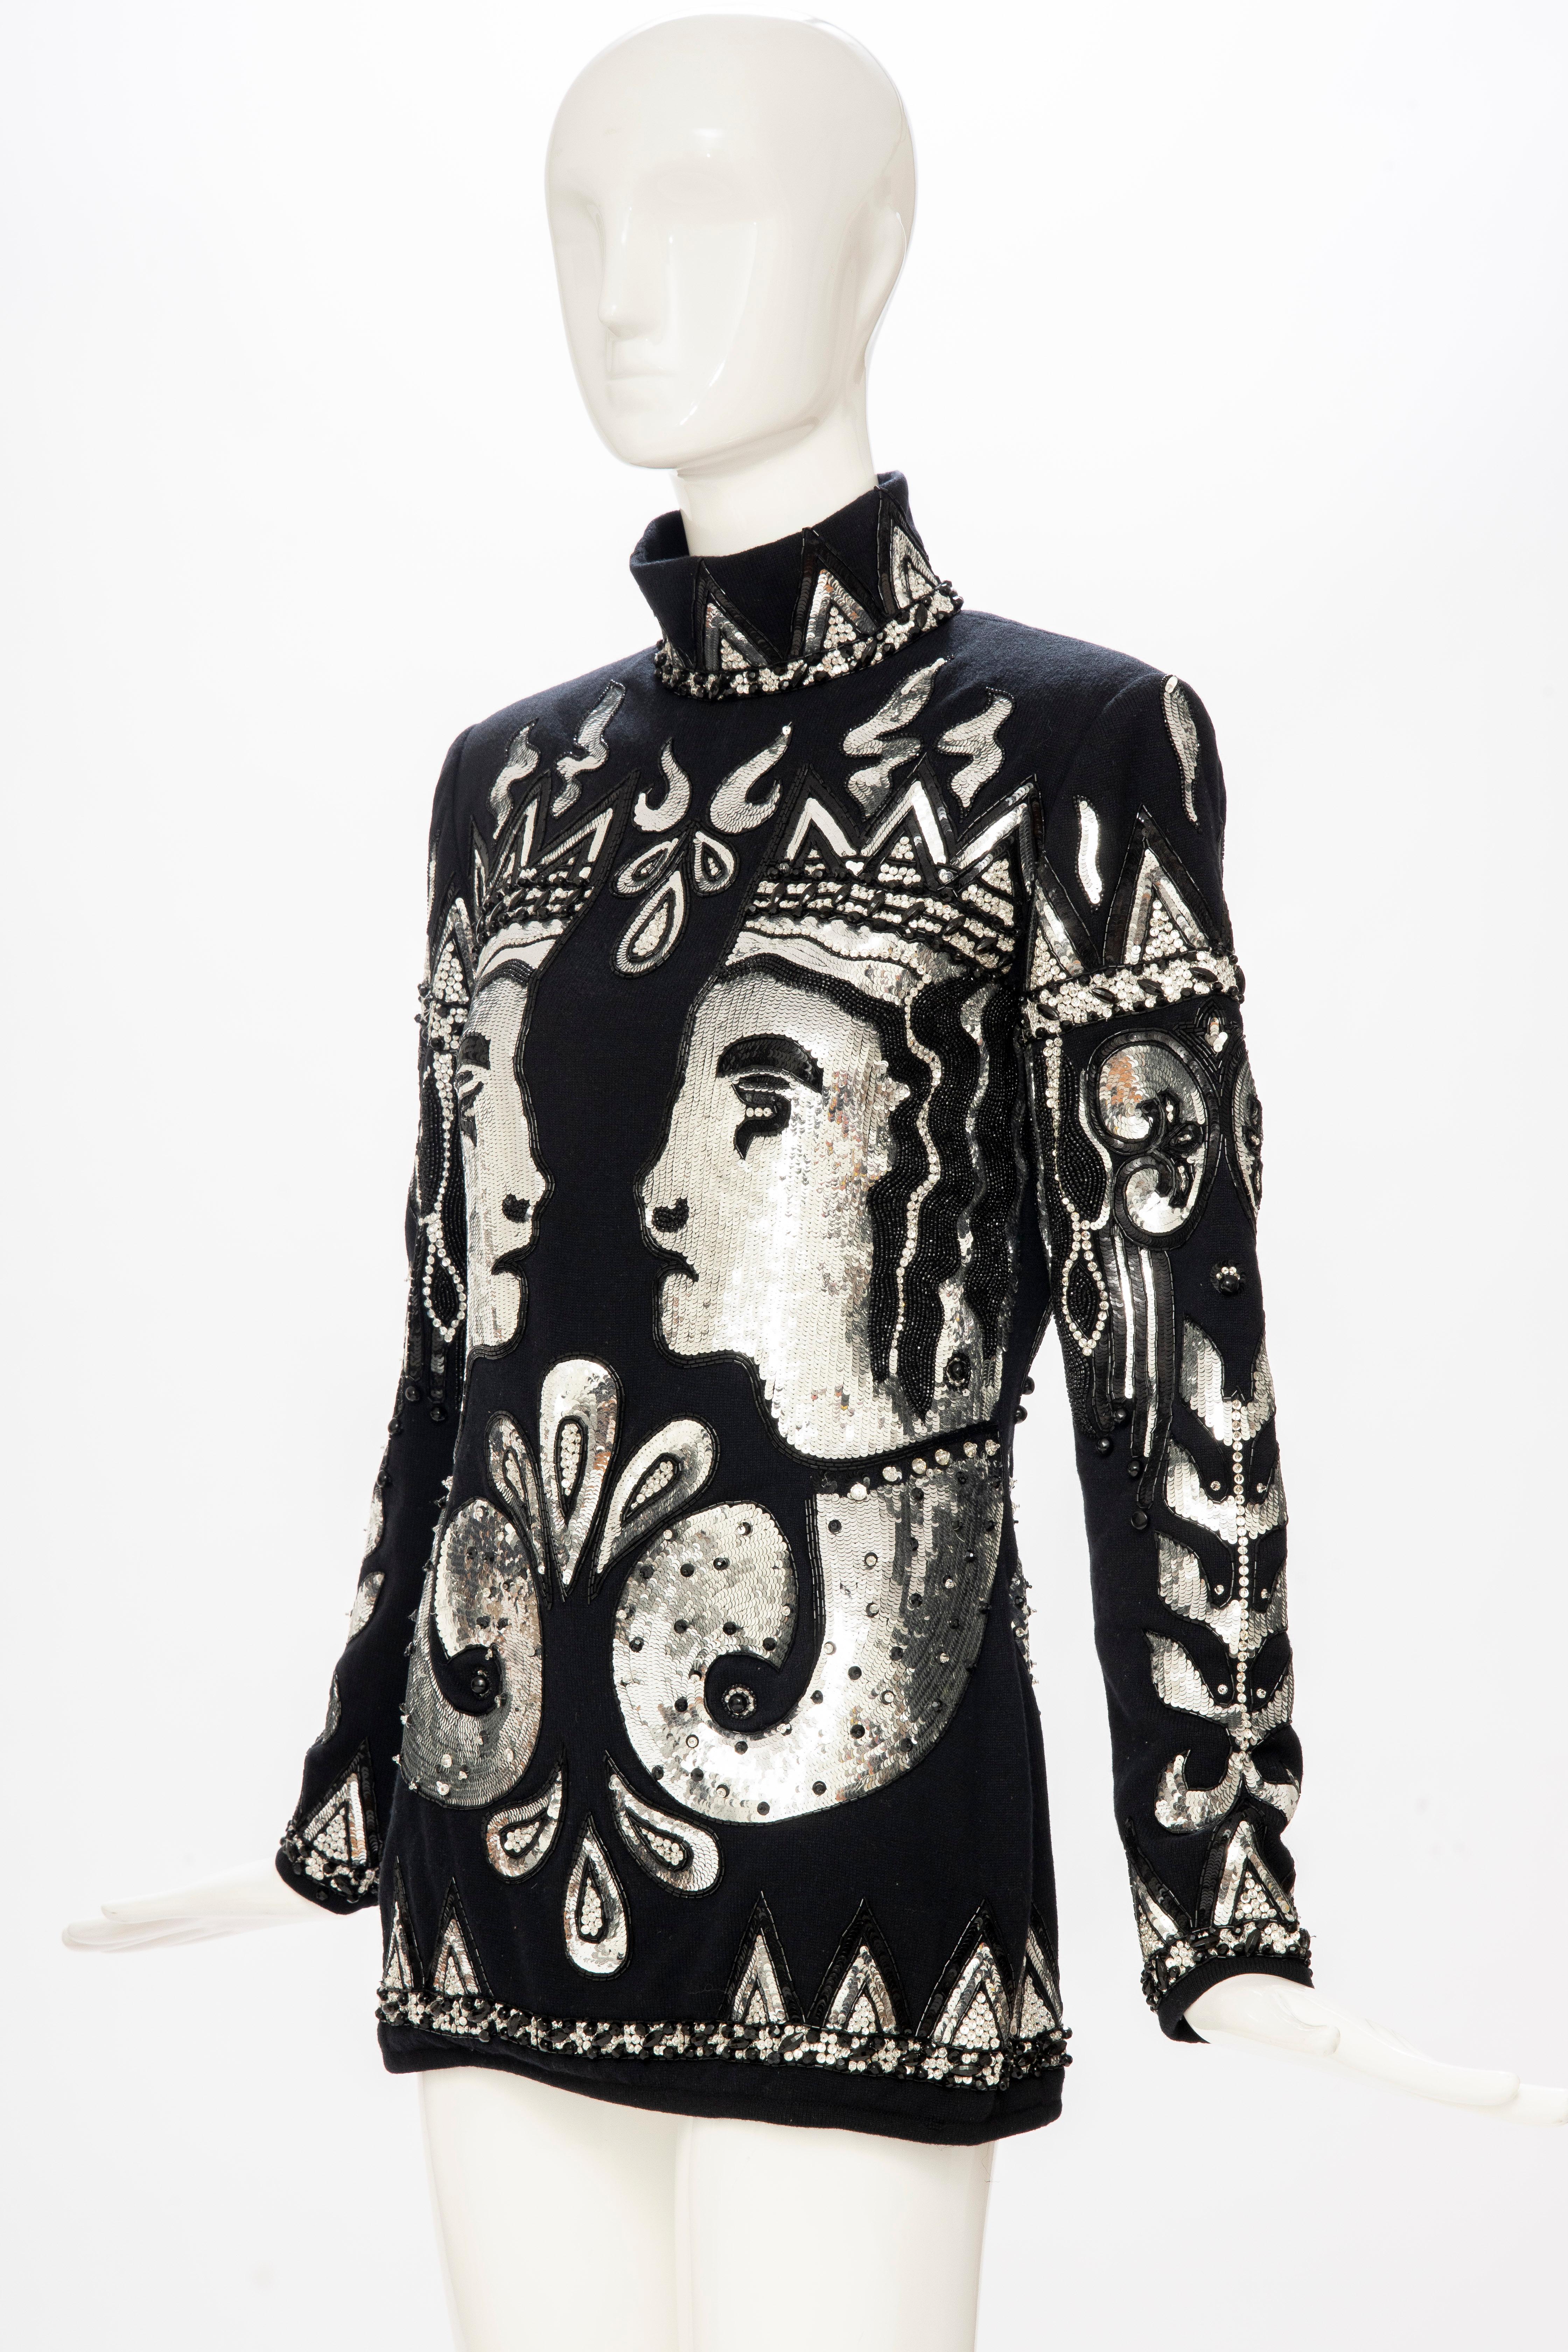 Valentino Boutique Black Wool Embroidered Silver Sequins Sweater, Fall 1989-90 7